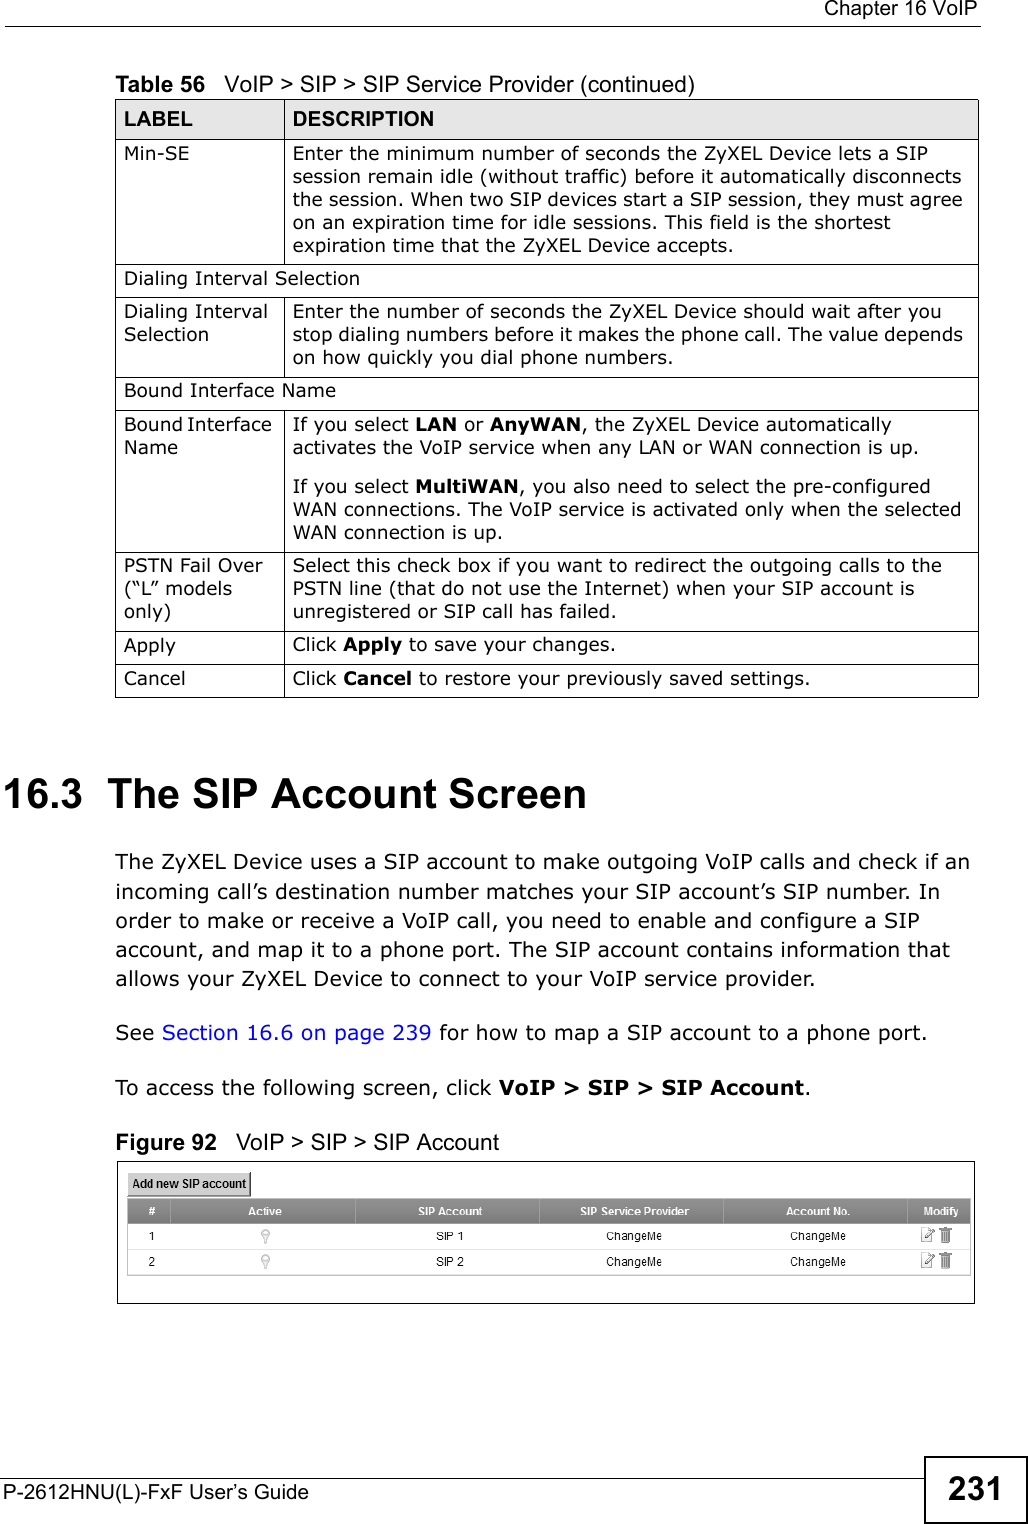  Chapter 16 VoIPP-2612HNU(L)-FxF User’s Guide 23116.3  The SIP Account ScreenThe ZyXEL Device uses a SIP account to make outgoing VoIP calls and check if an incoming call’s destination number matches your SIP account’s SIP number. In order to make or receive a VoIP call, you need to enable and configure a SIP account, and map it to a phone port. The SIP account contains information that allows your ZyXEL Device to connect to your VoIP service provider.See Section 16.6 on page 239 for how to map a SIP account to a phone port.To access the following screen, click VoIP &gt; SIP &gt; SIP Account.Figure 92   VoIP &gt; SIP &gt; SIP AccountMin-SE Enter the minimum number of seconds the ZyXEL Device lets a SIP session remain idle (without traffic) before it automatically disconnects the session. When two SIP devices start a SIP session, they must agreeon an expiration time for idle sessions. This field is the shortest expiration time that the ZyXEL Device accepts.Dialing Interval SelectionDialing Interval SelectionEnter the number of seconds the ZyXEL Device should wait after you stop dialing numbers before it makes the phone call. The value depends on how quickly you dial phone numbers.Bound Interface NameBound Interface NameIf you select LAN or AnyWAN, the ZyXEL Device automatically activates the VoIP service when any LAN or WAN connection is up.If you select MultiWAN, you also need to select the pre-configuredWAN connections. The VoIP service is activated only when the selected WAN connection is up.PSTN Fail Over (“L” models only)Select this check box if you want to redirect the outgoing calls to the PSTN line (that do not use the Internet) when your SIP account is unregistered or SIP call has failed. Apply Click Apply to save your changes.Cancel Click Cancel to restore your previously saved settings.Table 56   VoIP &gt; SIP &gt; SIP Service Provider (continued)LABEL DESCRIPTION